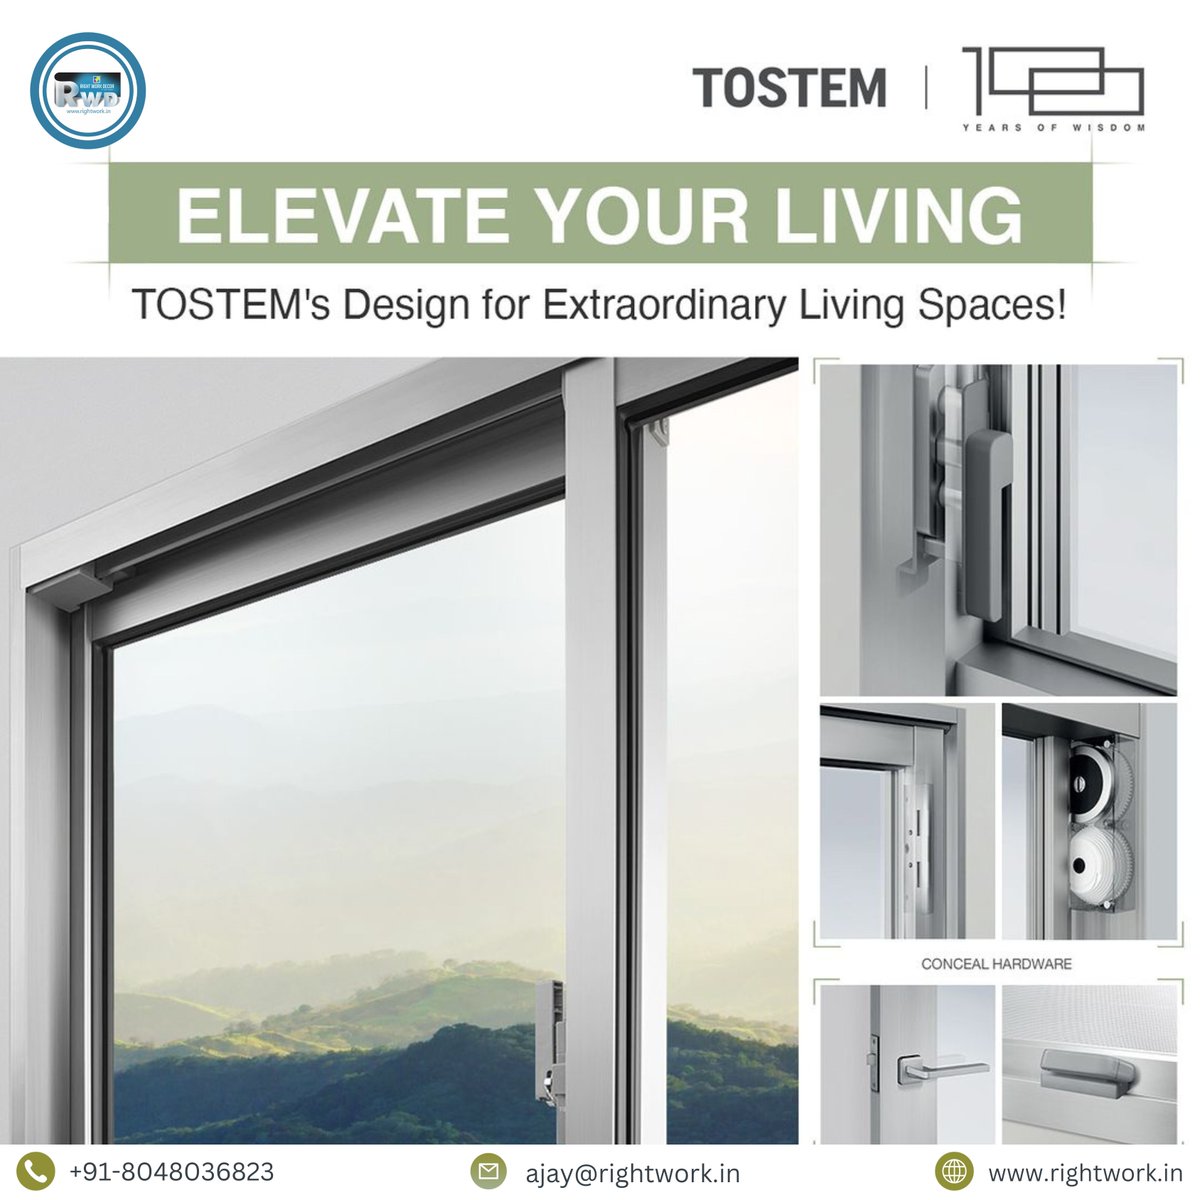 Elevate Your Mornings with TOSTEM Windows: Embrace Light, Embrace Life! 

Every morning is a canvas of new opportunities, and TOSTEM Windows is here to paint it with radiance and inspiration. 

#TOSTEMWindows #InspiringViews #BrighterMornings #EmbraceTheLight #ElevateLife.